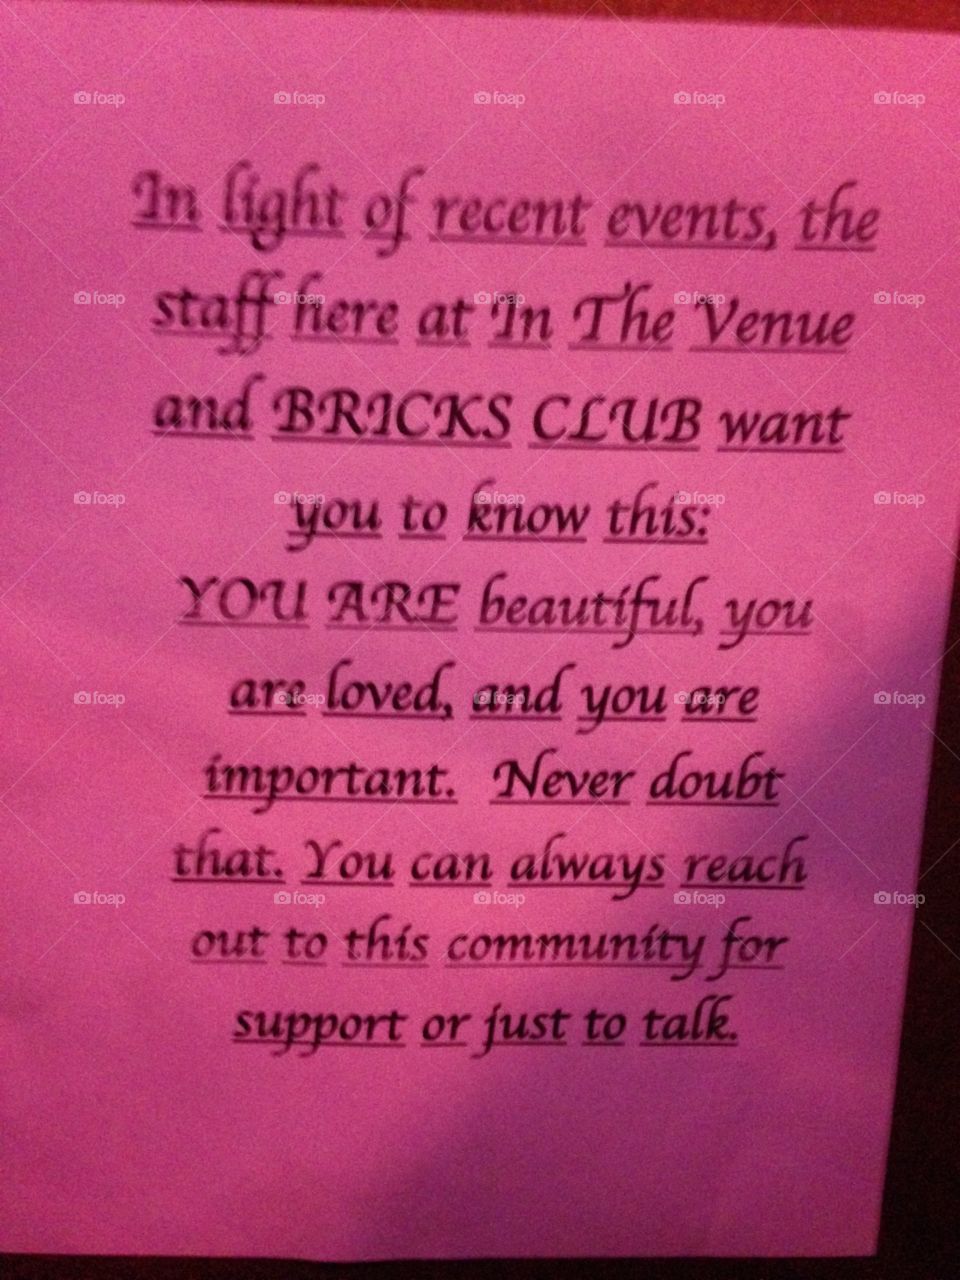 sign in woman's restroom at concert venue